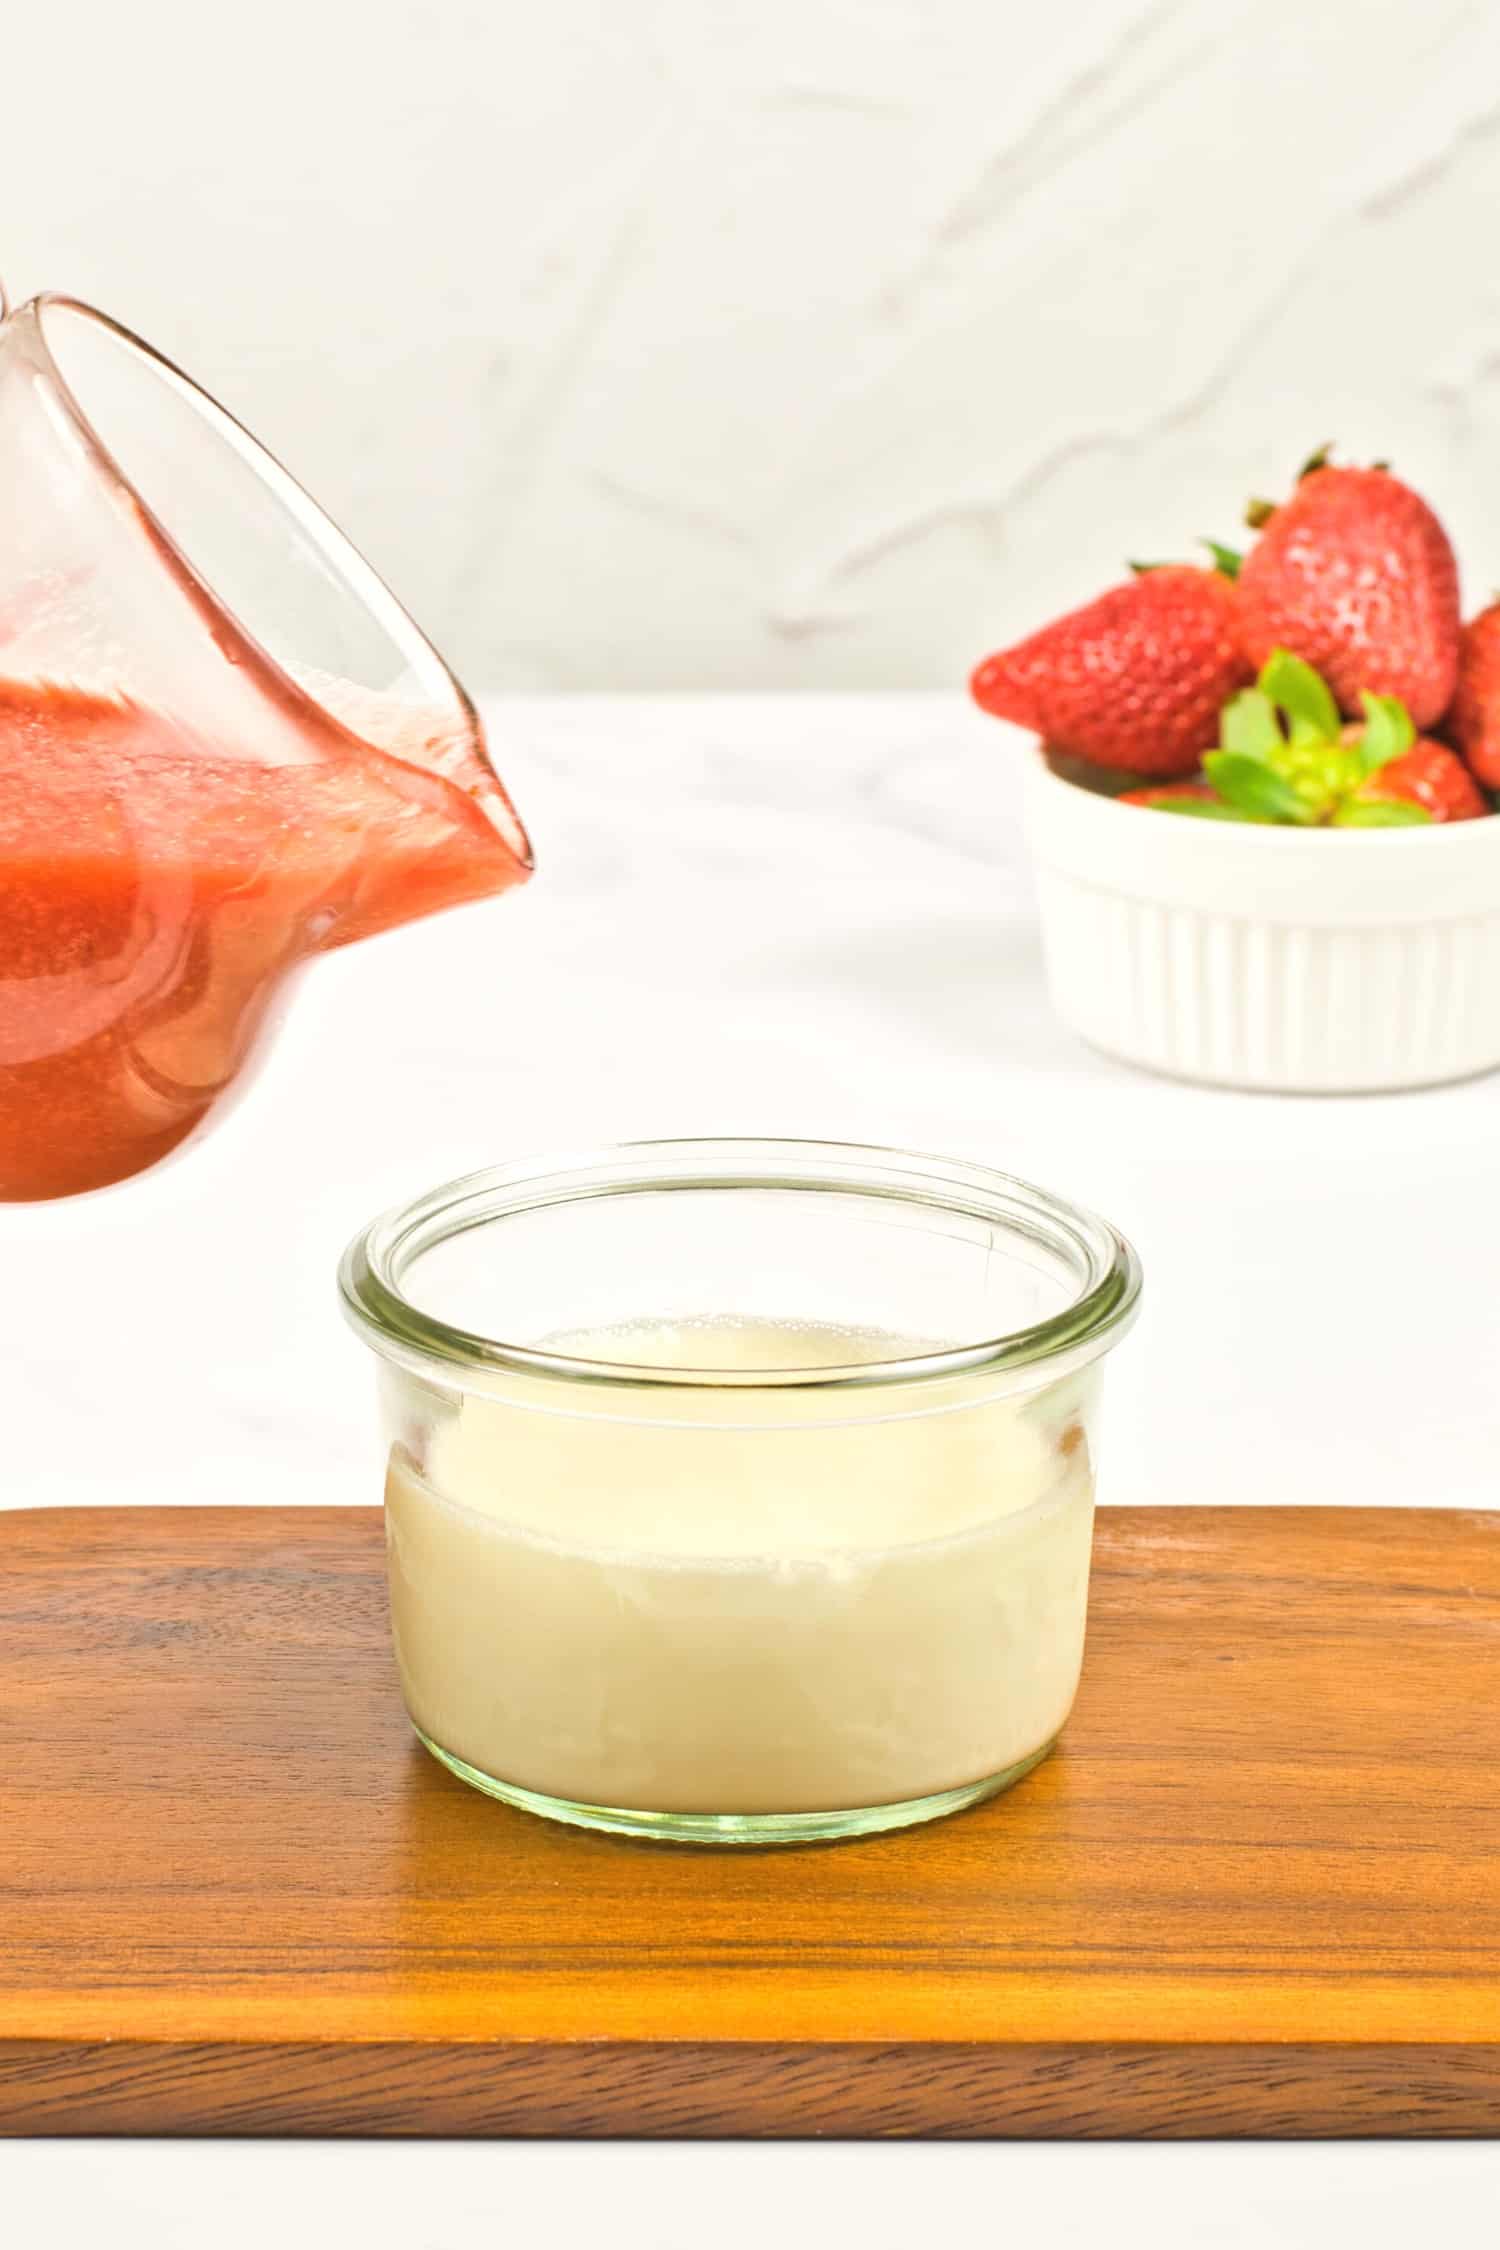 Pouring strawberry sauce over a glass with panna cotta.